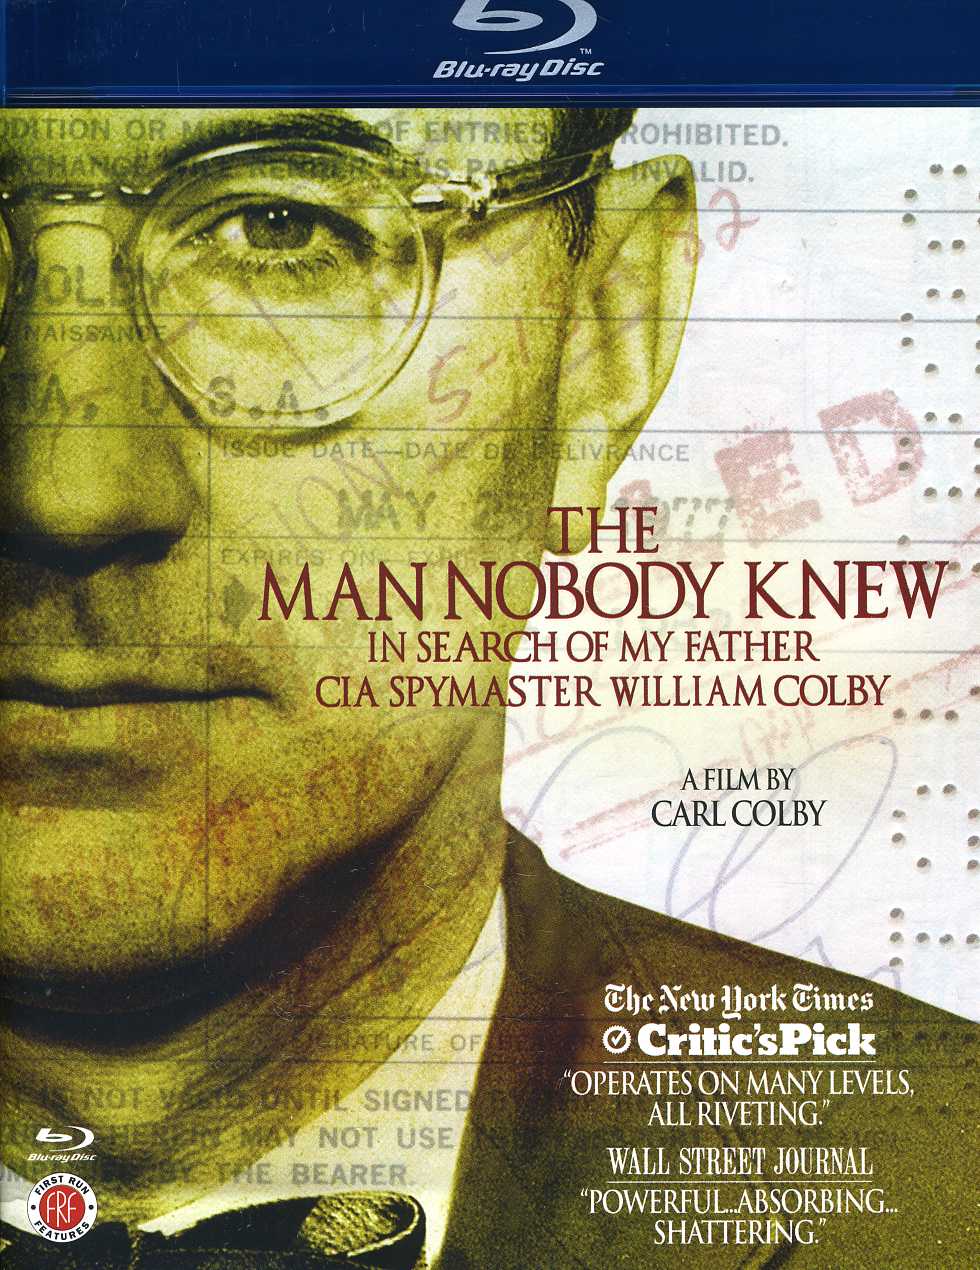 MAN NOBODY KNEW: IN SEARCH OF MY FATHER